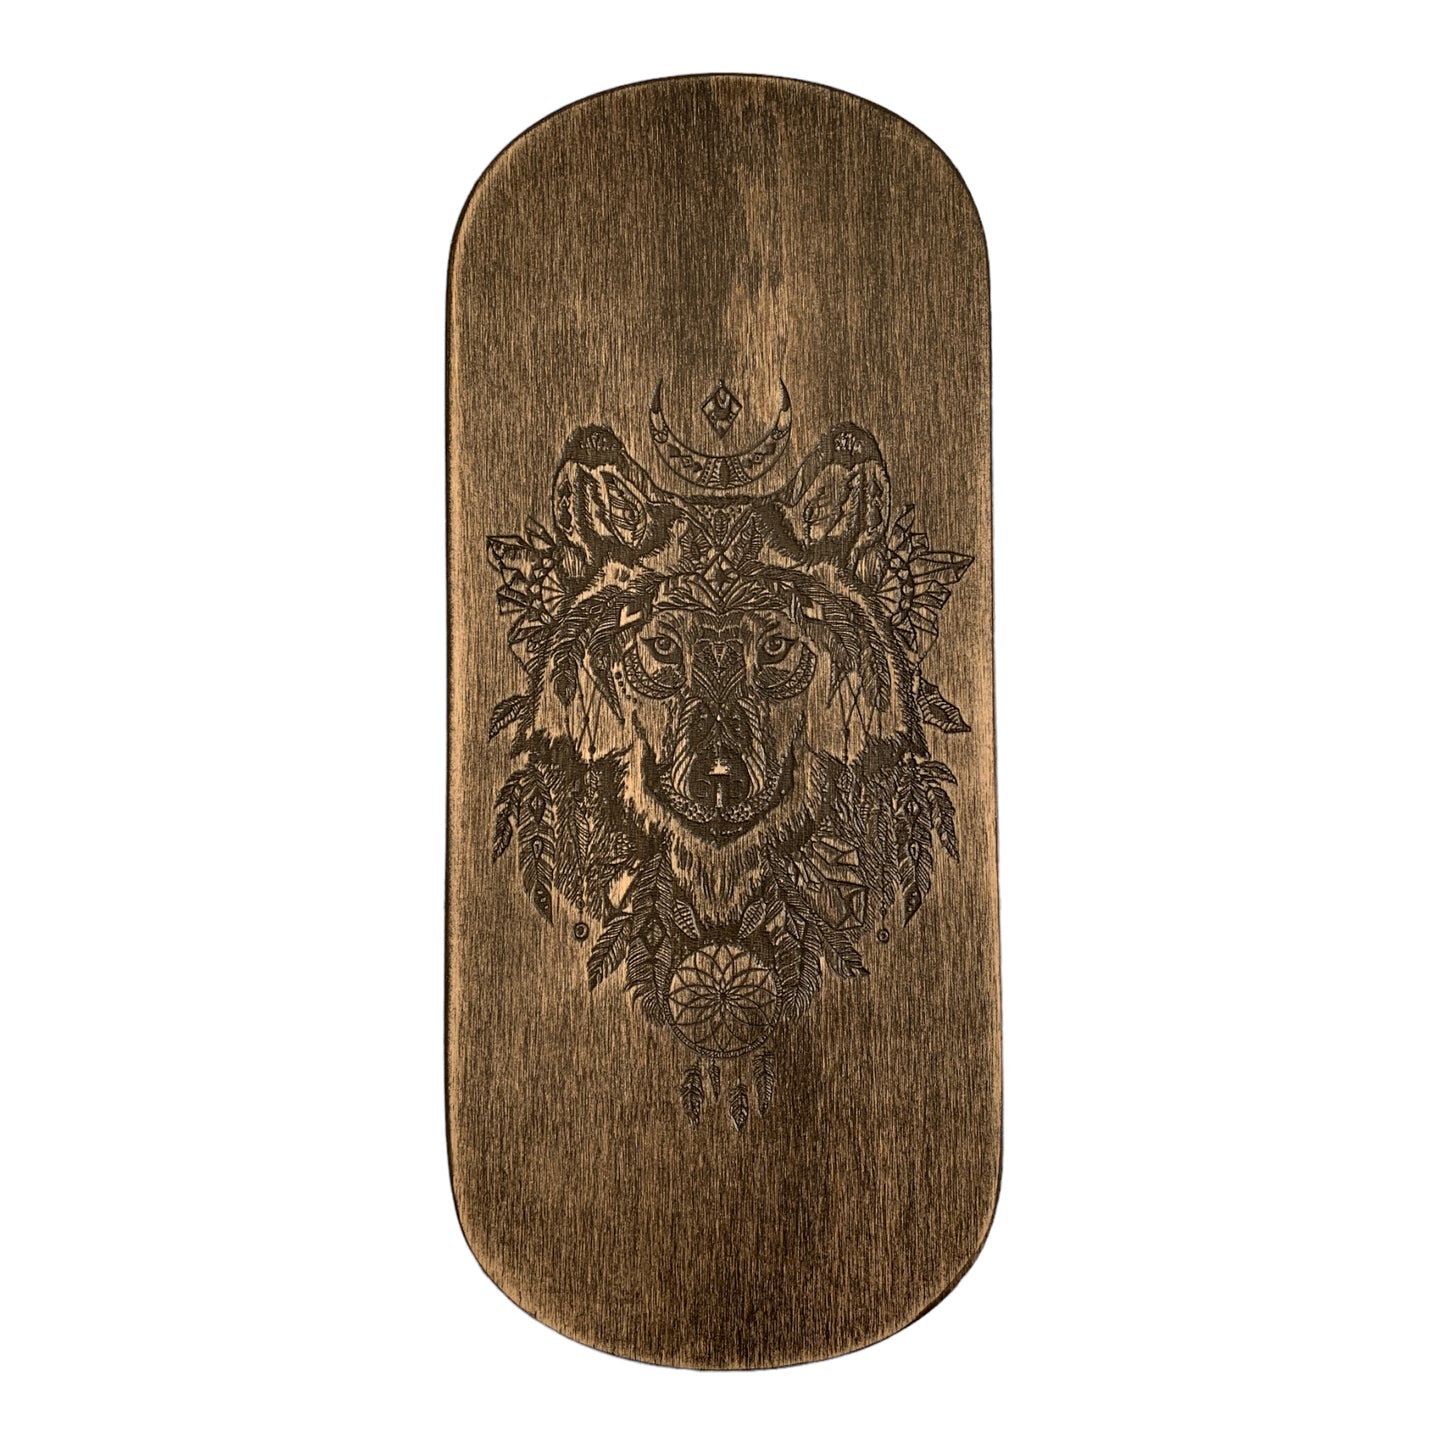 Sadhu board with Ballistic Nails bullets and forged steel. Wolf, 10 mm